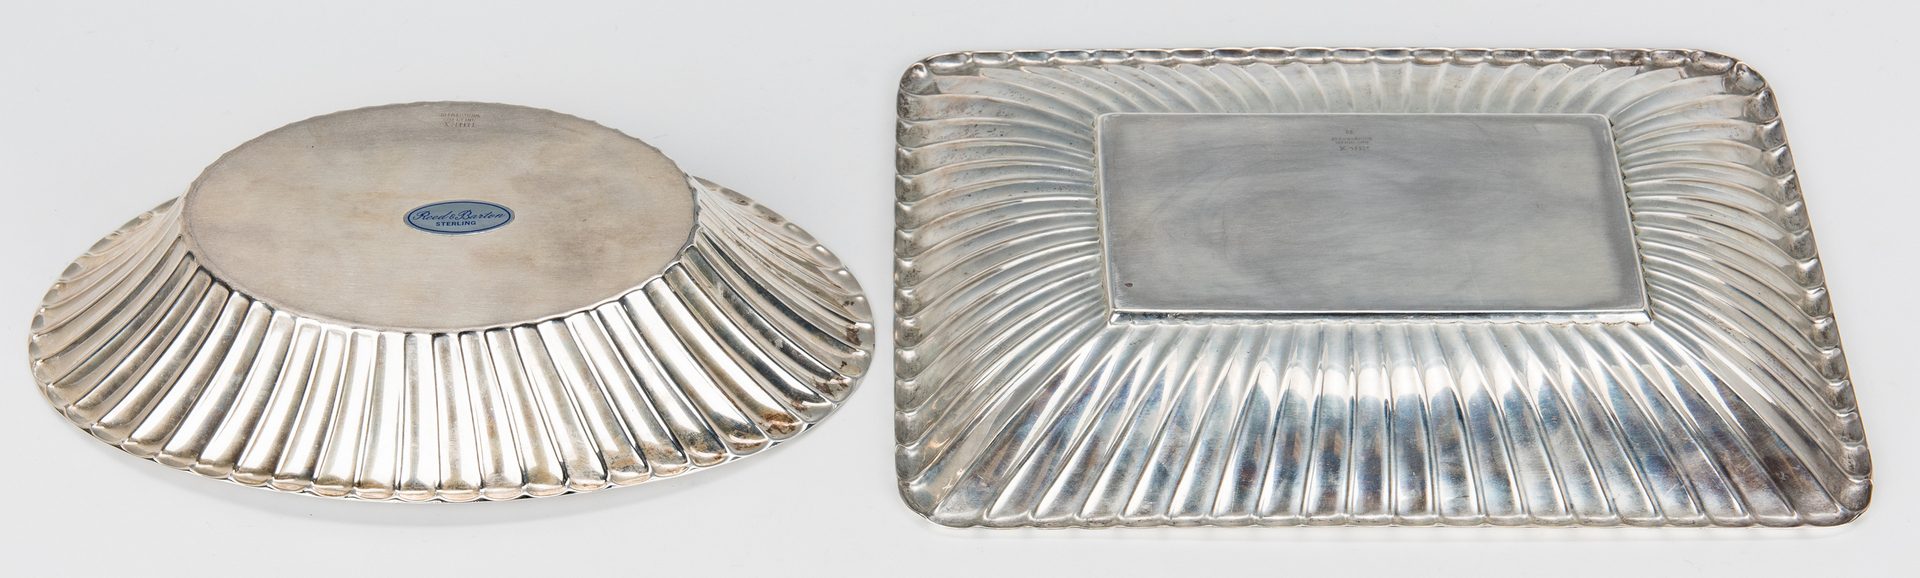 Lot 163: 2 Reed & Barton Sterling Dishes